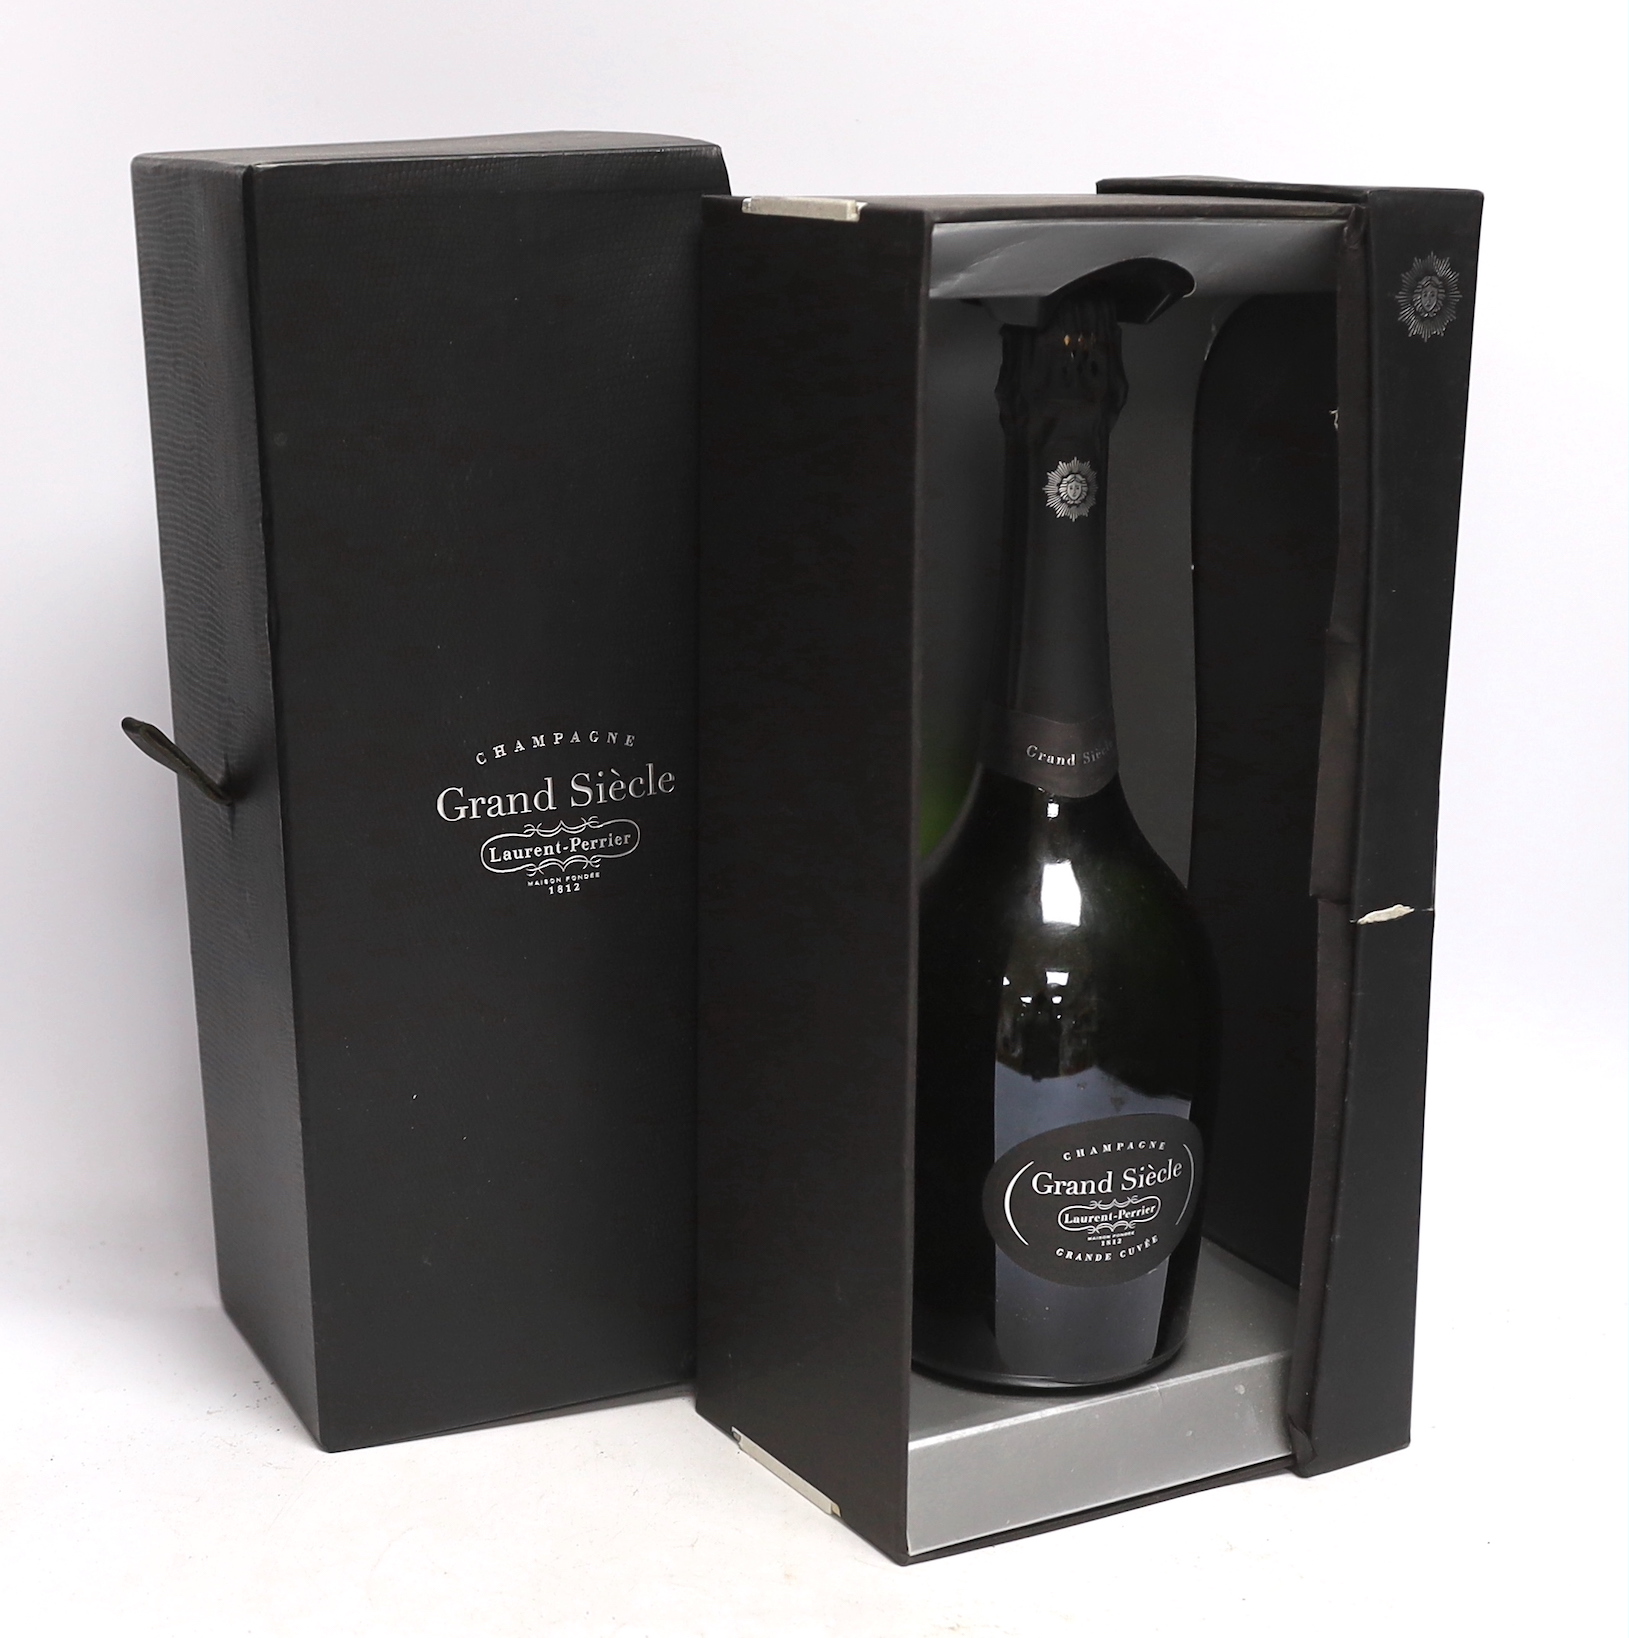 One bottle of Grand Siecle champagne with box                                                                                                                                                                               